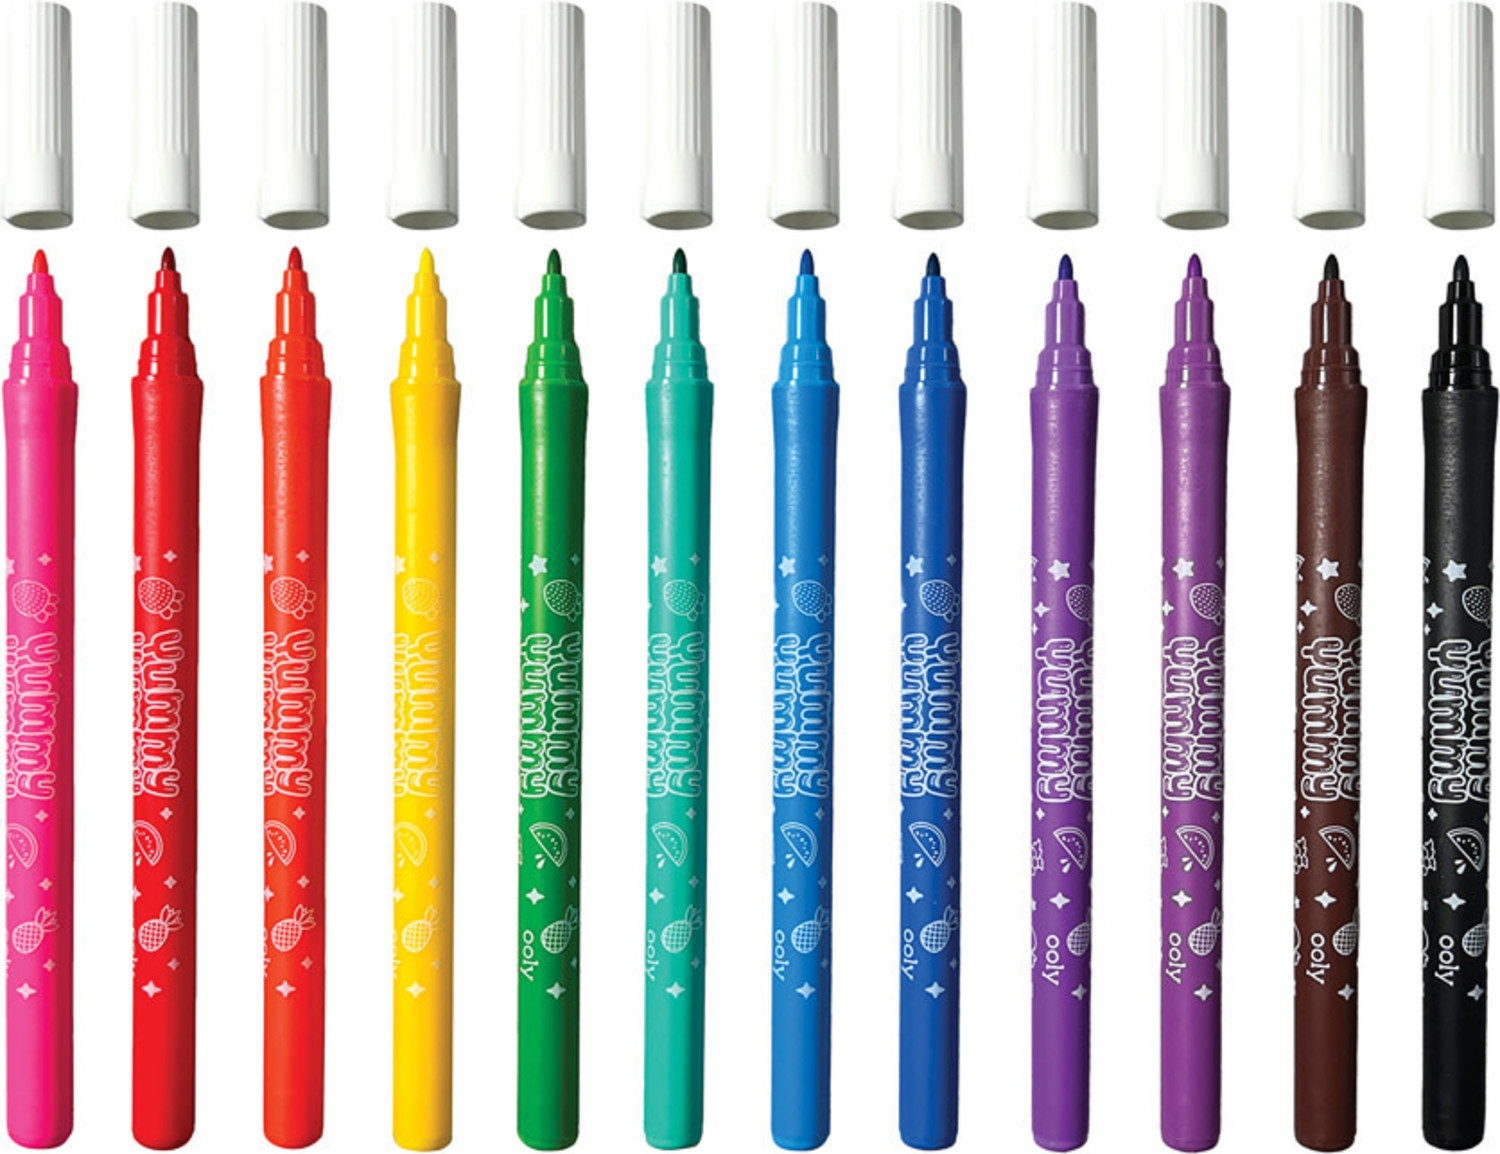 https://cdn.shoplightspeed.com/shops/653480/files/52406551/1500x4000x3/ooly-yummy-yummy-scented-washable-markers-set-of-1.jpg